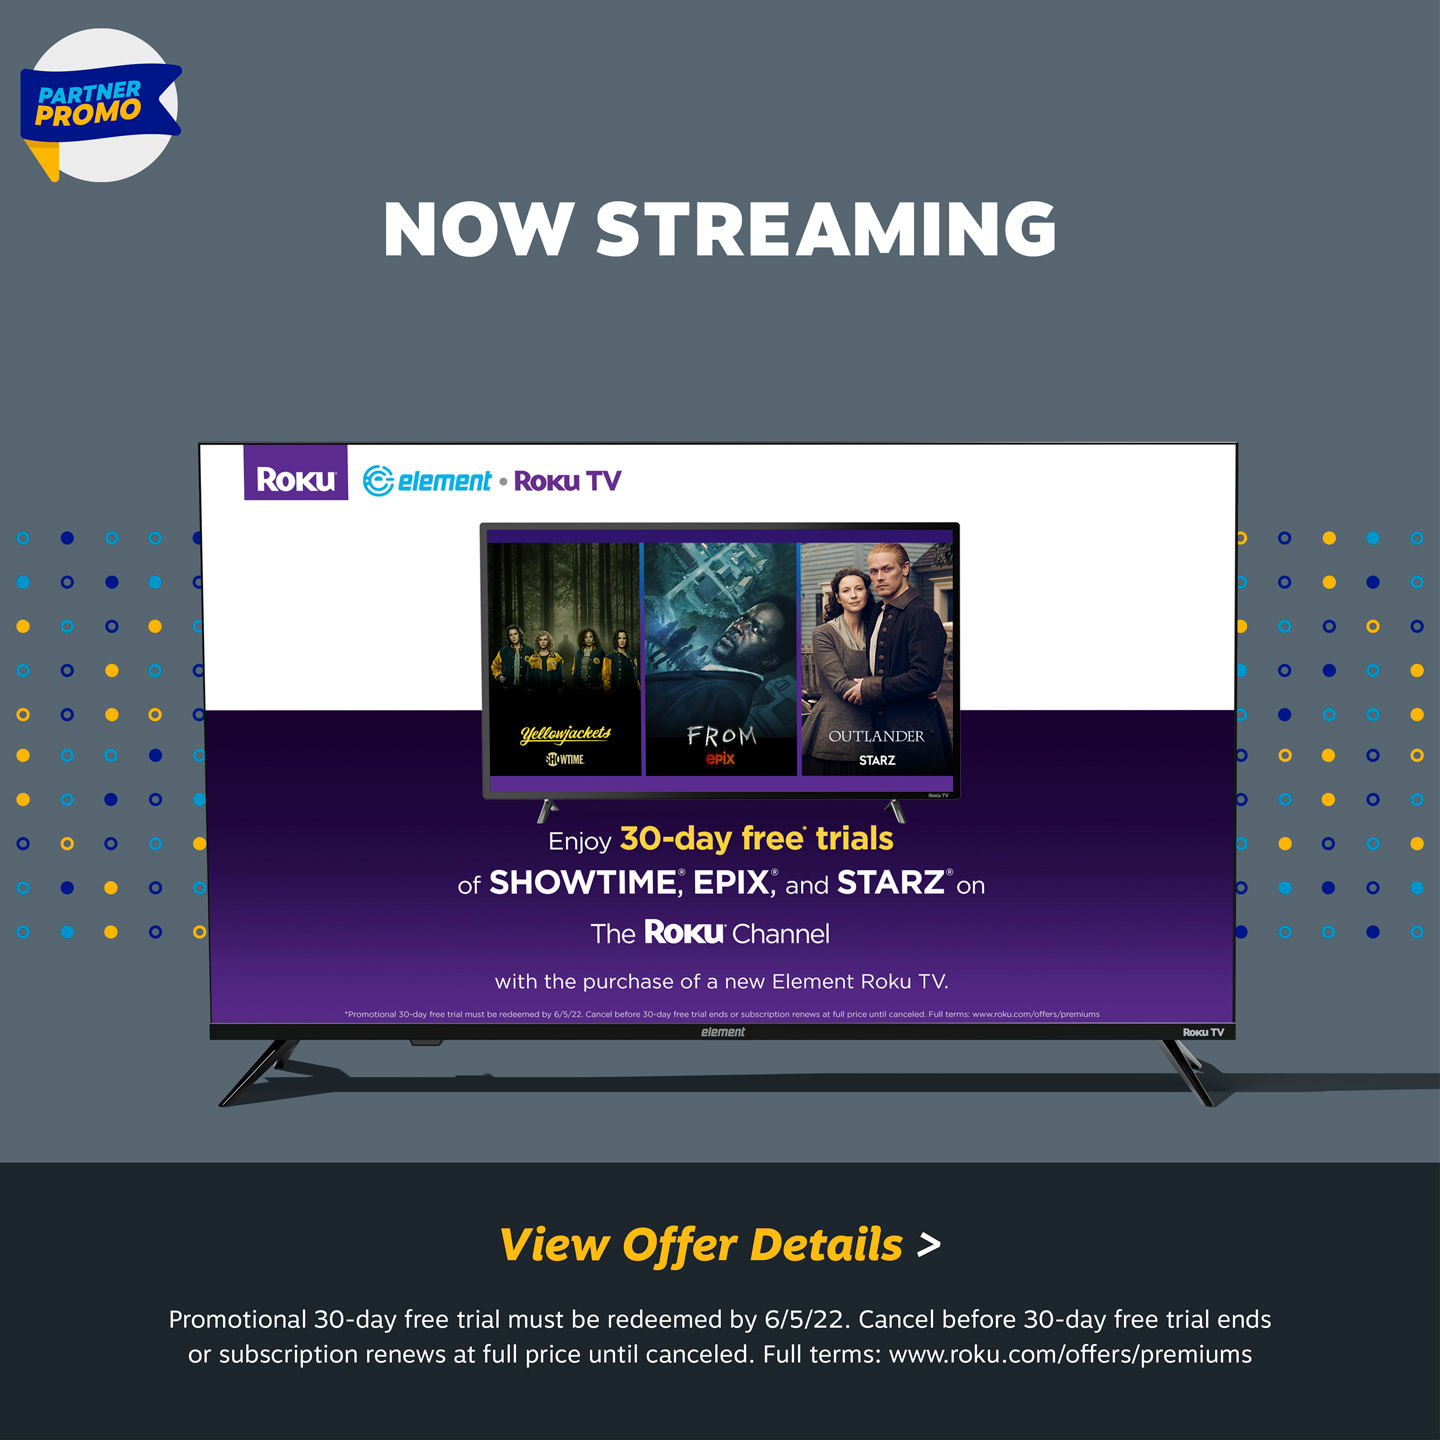 Now streaming: 30-day free trials of Showtime, Epix, and STARZ on The Roku Channel with the purchase of a new Element Roku TV